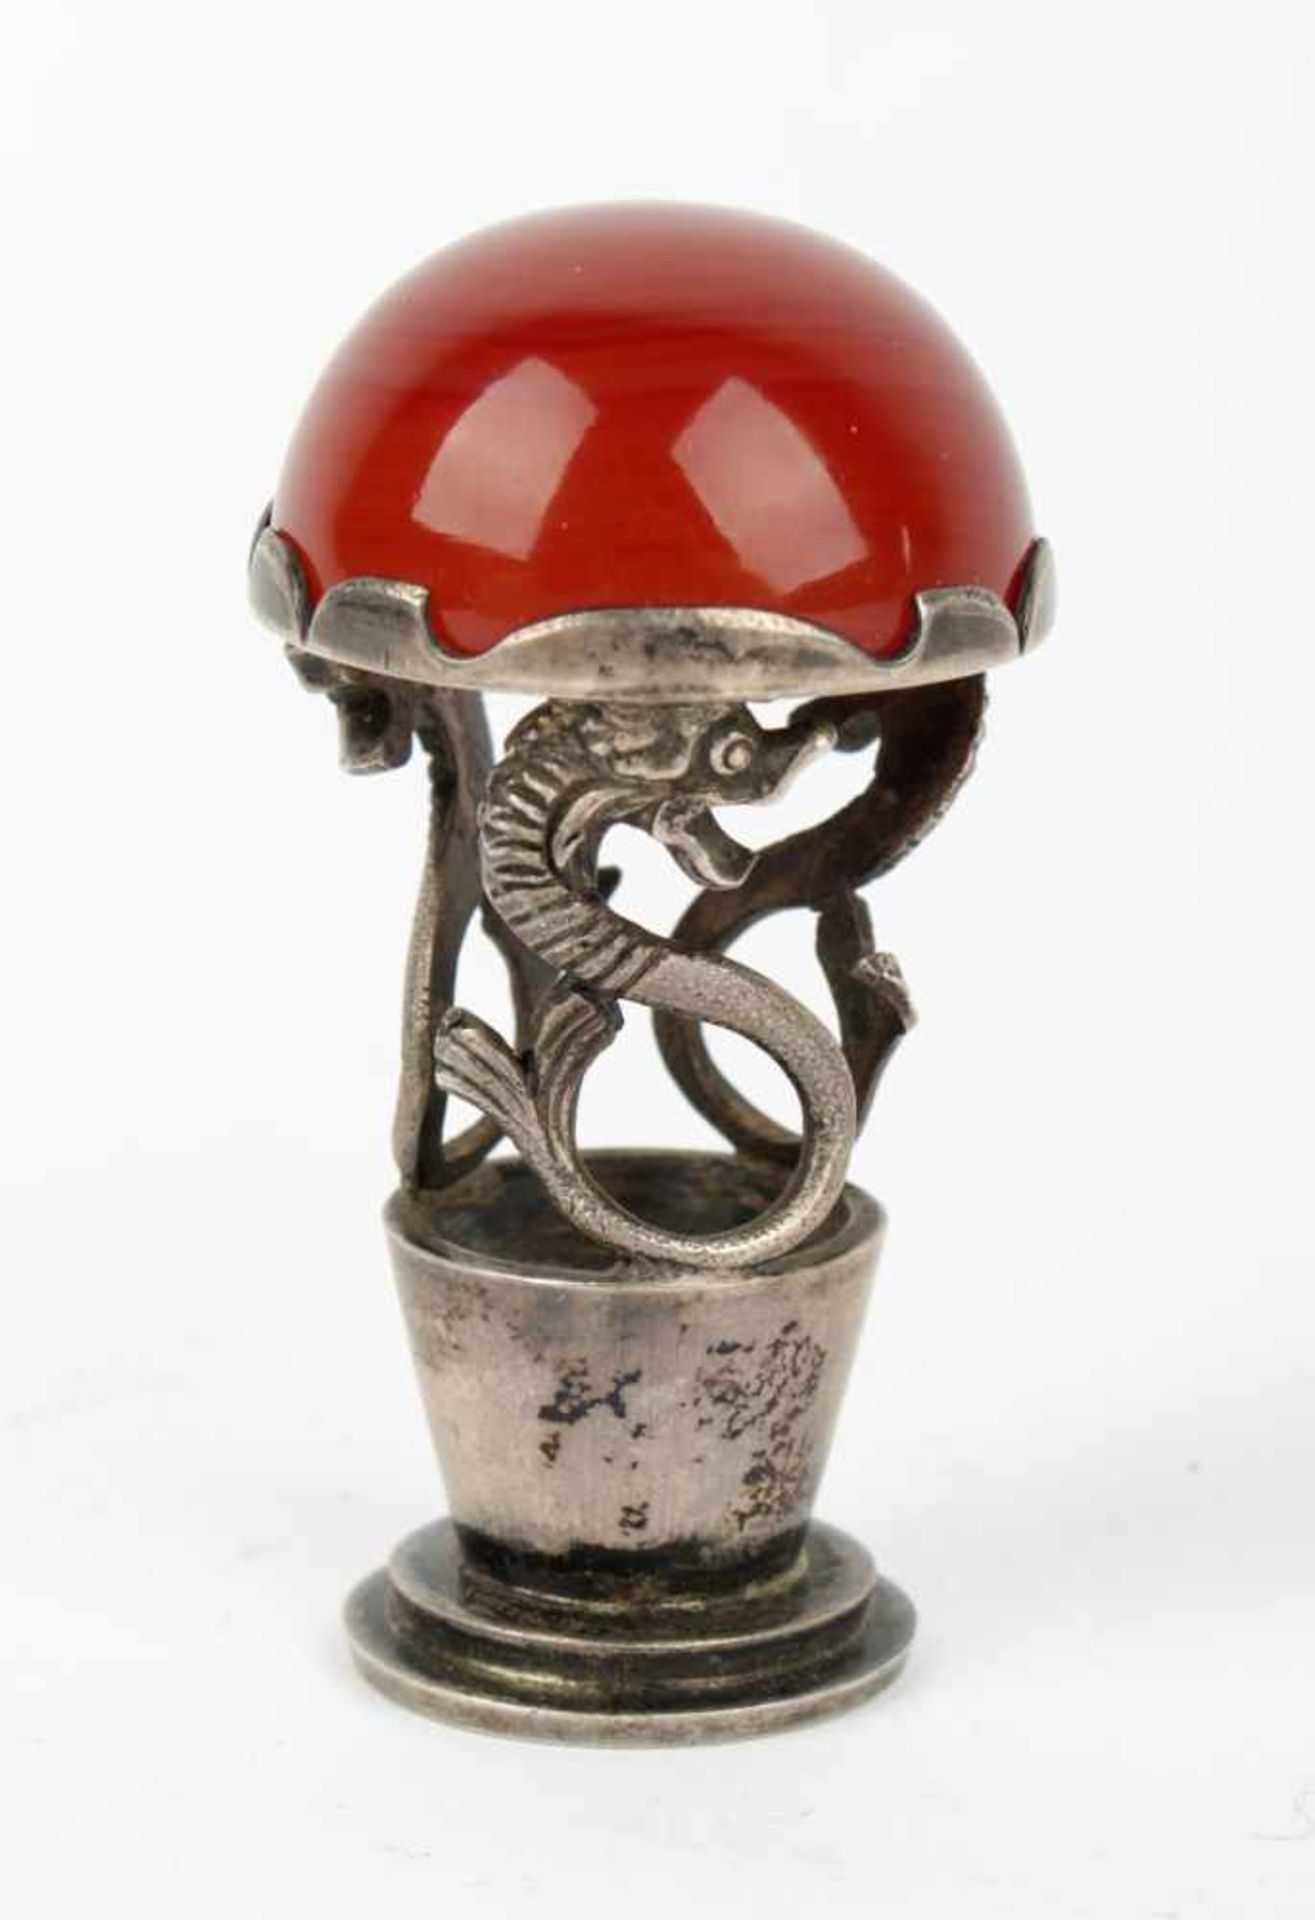 Silver wax seal with agate End of the 19th or early 20th century, silver sealer, plastic